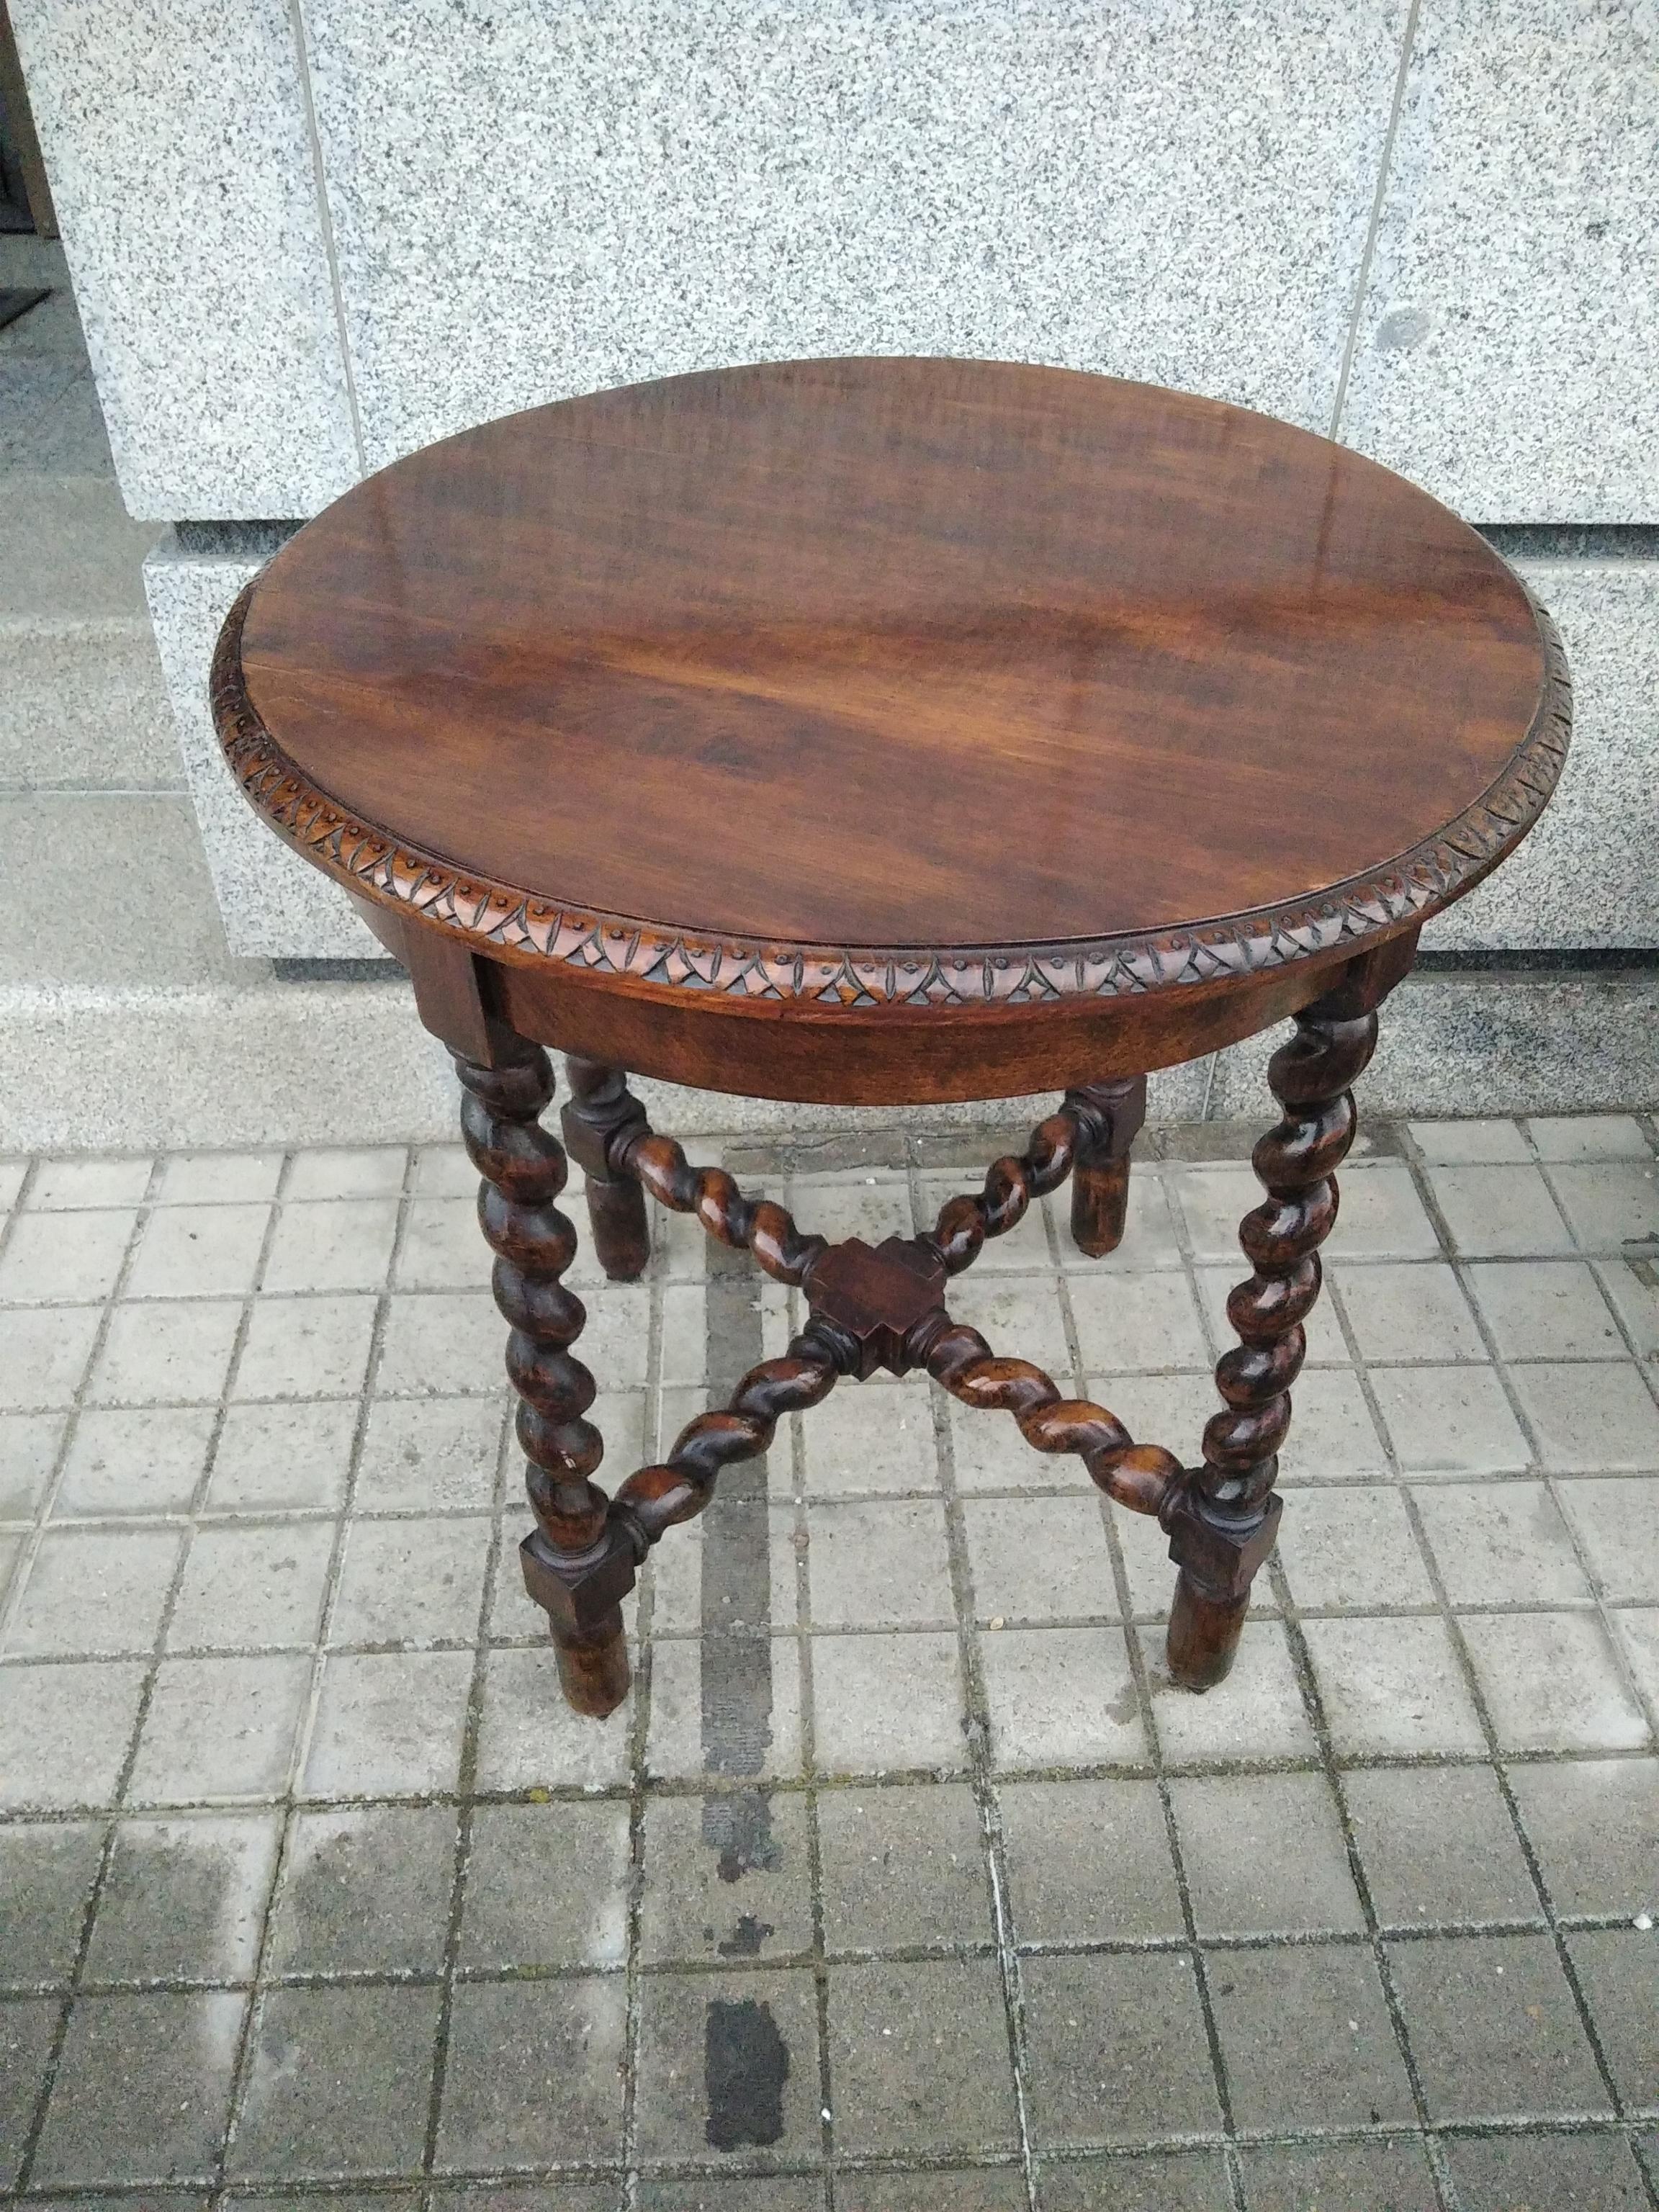 Lovely Round side table features barley twist legs, 18th or 19th Century

Beautiful  Side or end table, In perfect condition. Very well cared for

This table is raised on a base composed of four turned legs and a cross-shaped stretcher, also turned